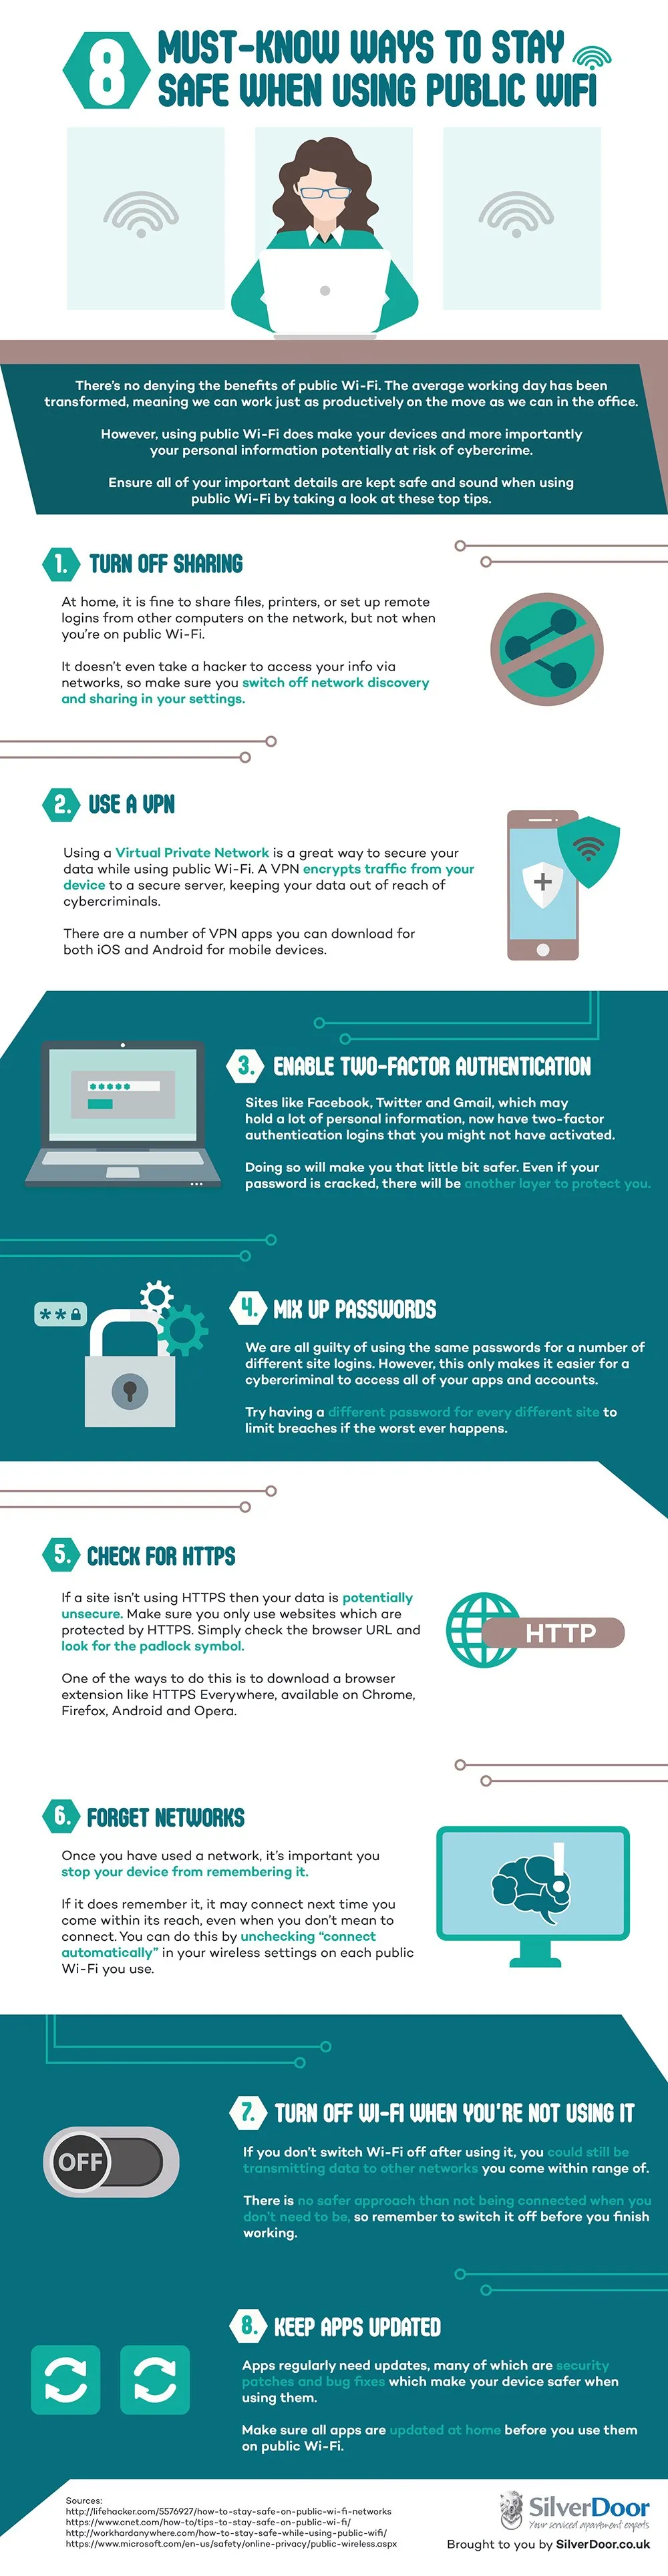 8 Must-Know Ways To Stay Safe When Using Public Wi-Fi - #Infographic